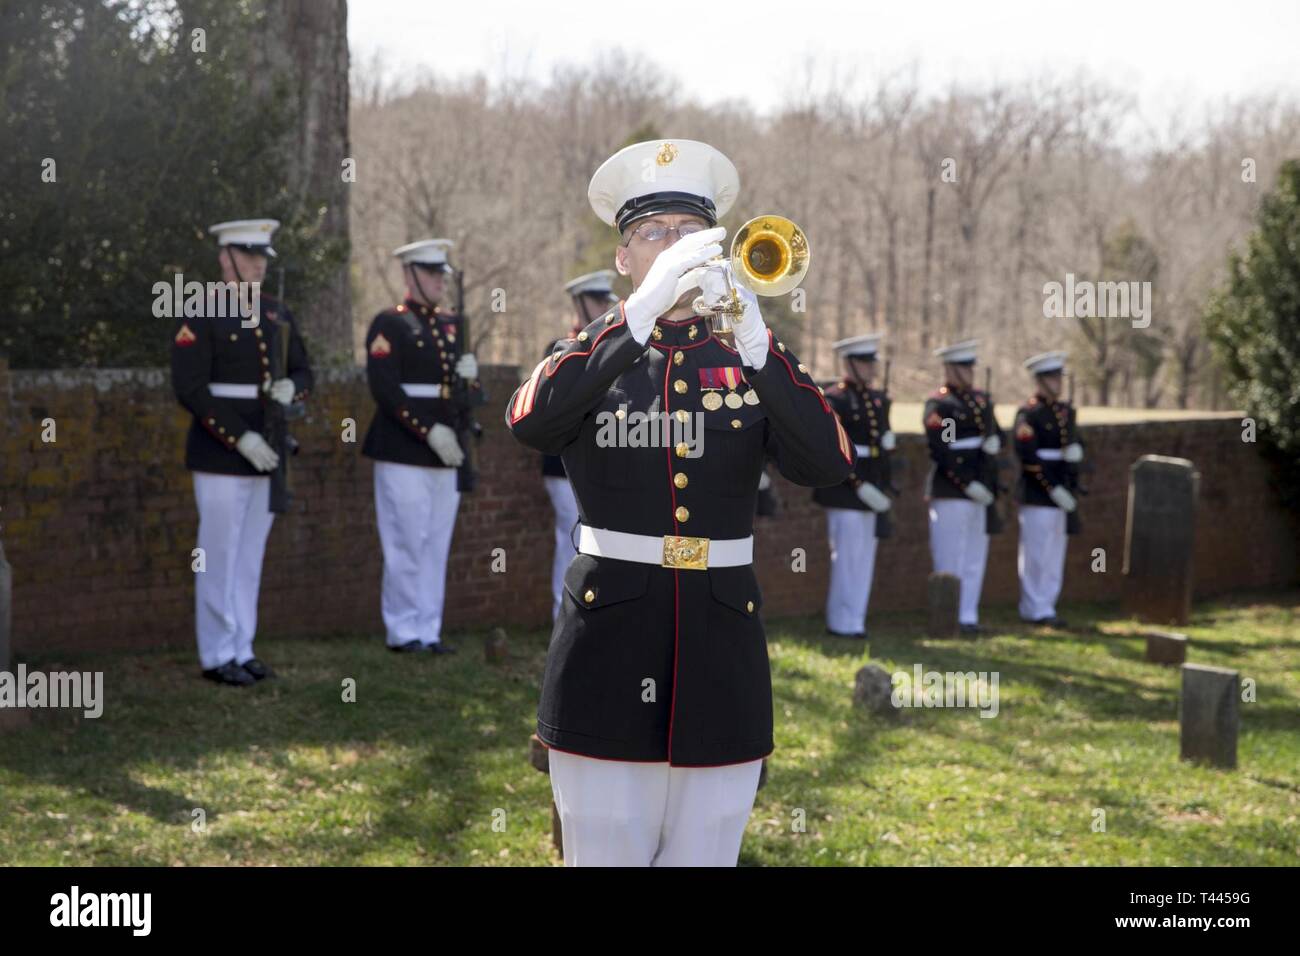 A U.S. Marine with the Quantico Marine Band plays 'Taps' during the Madison wreath laying ceremony, held at the final resting place of the 4th President of the United States, James Madison, at Montpelier, Orange, Va., March 16, 2019. This event was held in commemoration of the 268th anniversary of the birthdate of Madison, and has also been decreed as James Madison Appreciation Day for the Commonwealth of Virginia. Stock Photo